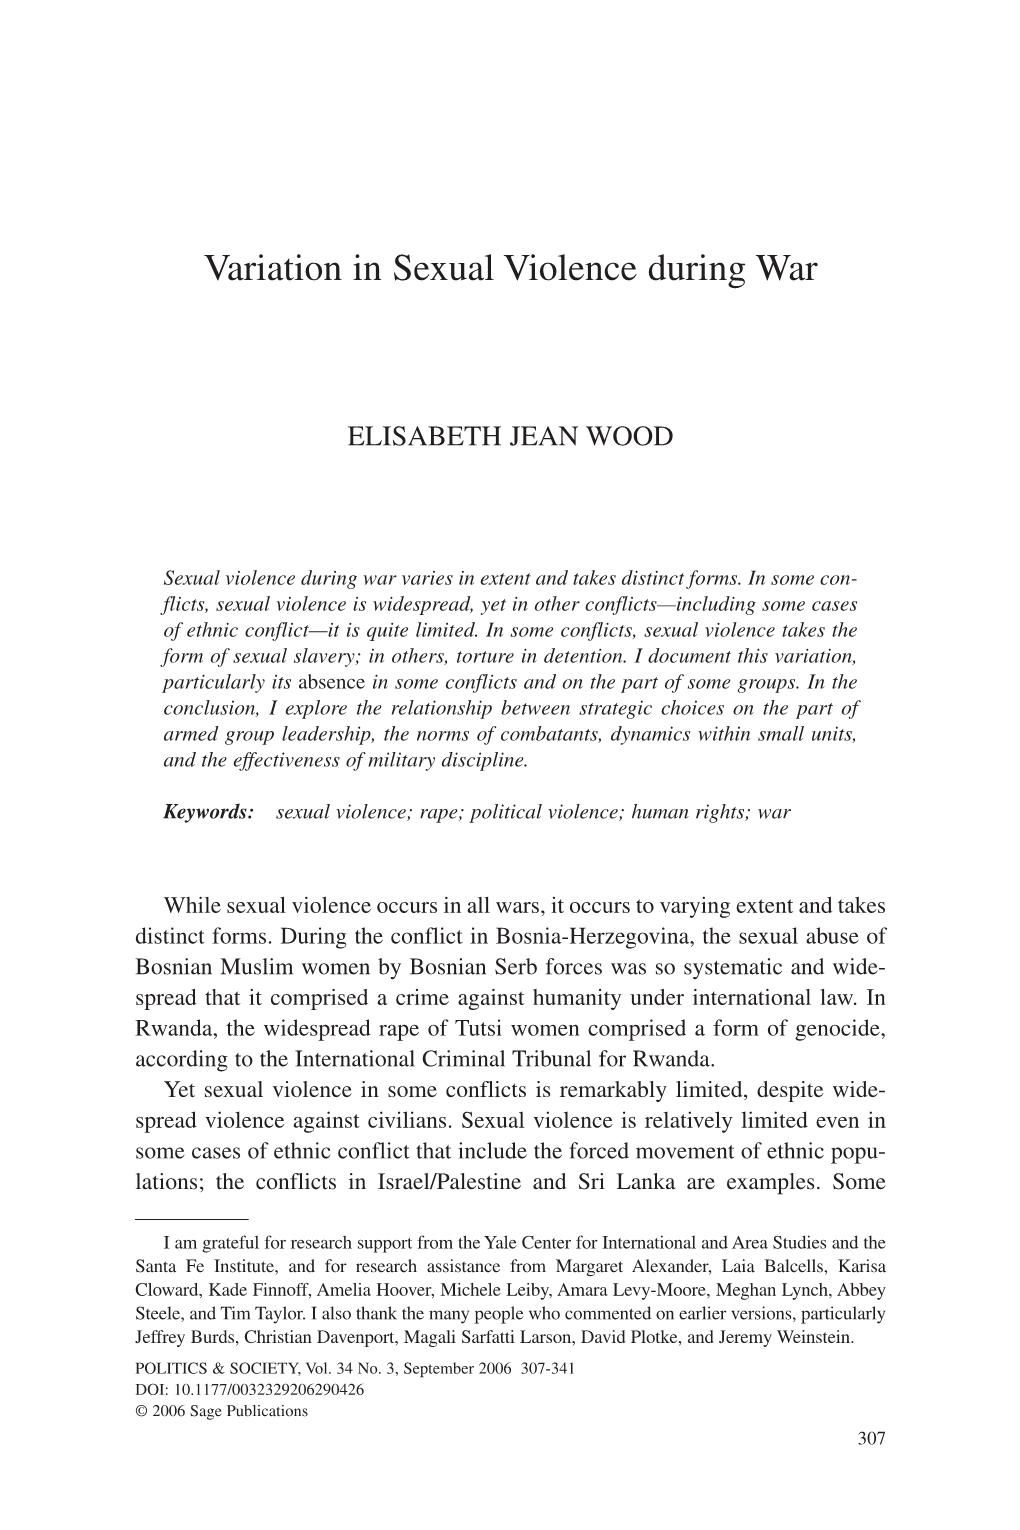 Variation in Sexual Violence During War